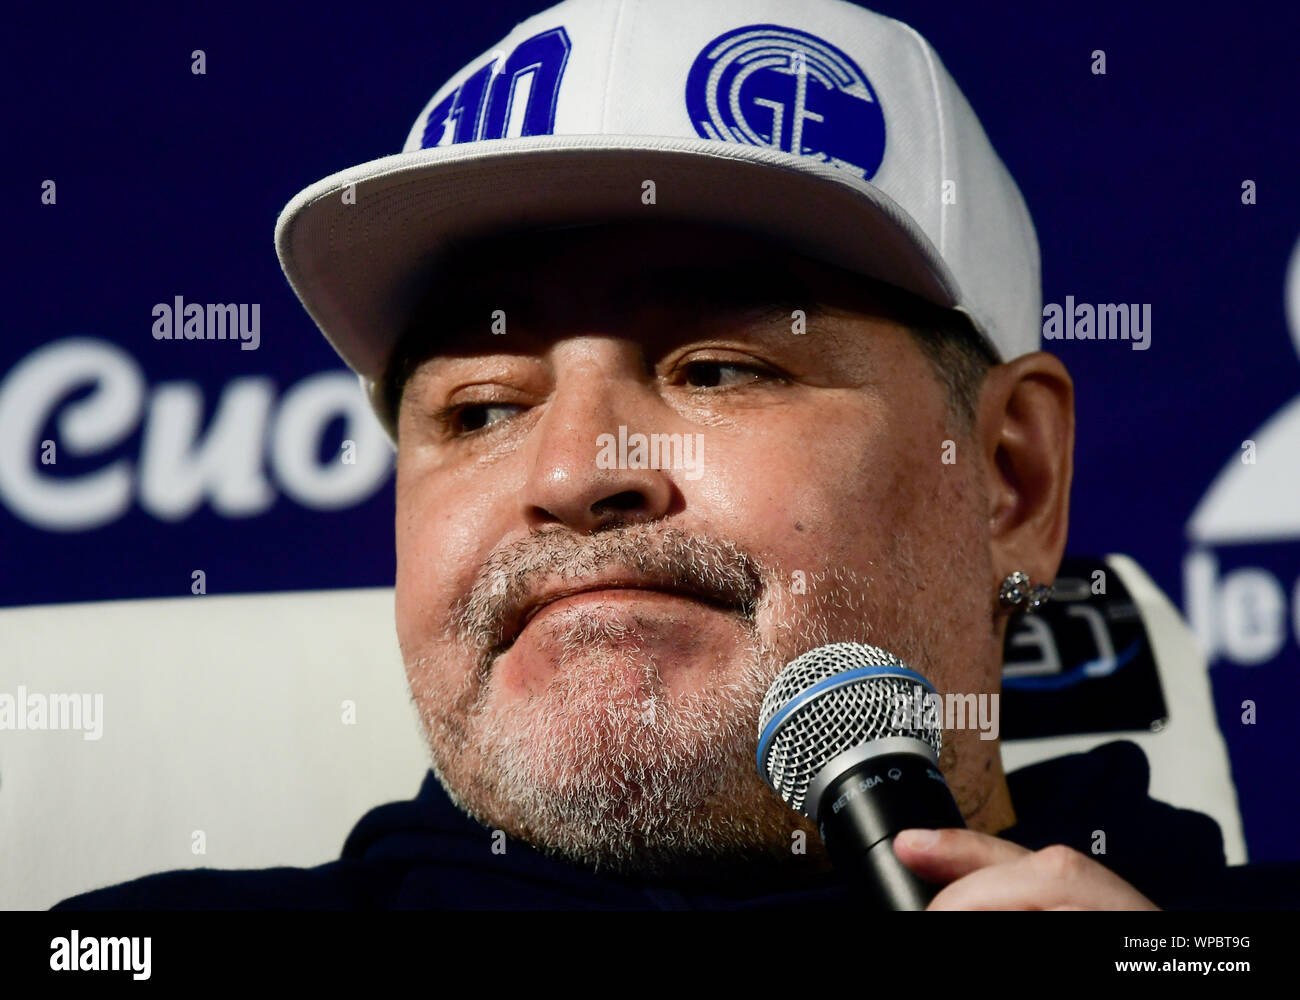 La Plata, Argentina. 08th Sep, 2019. Former soccer player Diego Maradona speaks on stage during his first training session at the Gimnasia y Esgrima football club from La Plata, 60 kilometres south of the capital. Credit: Gustavo Ortiz/dpa/Alamy Live News Stock Photo